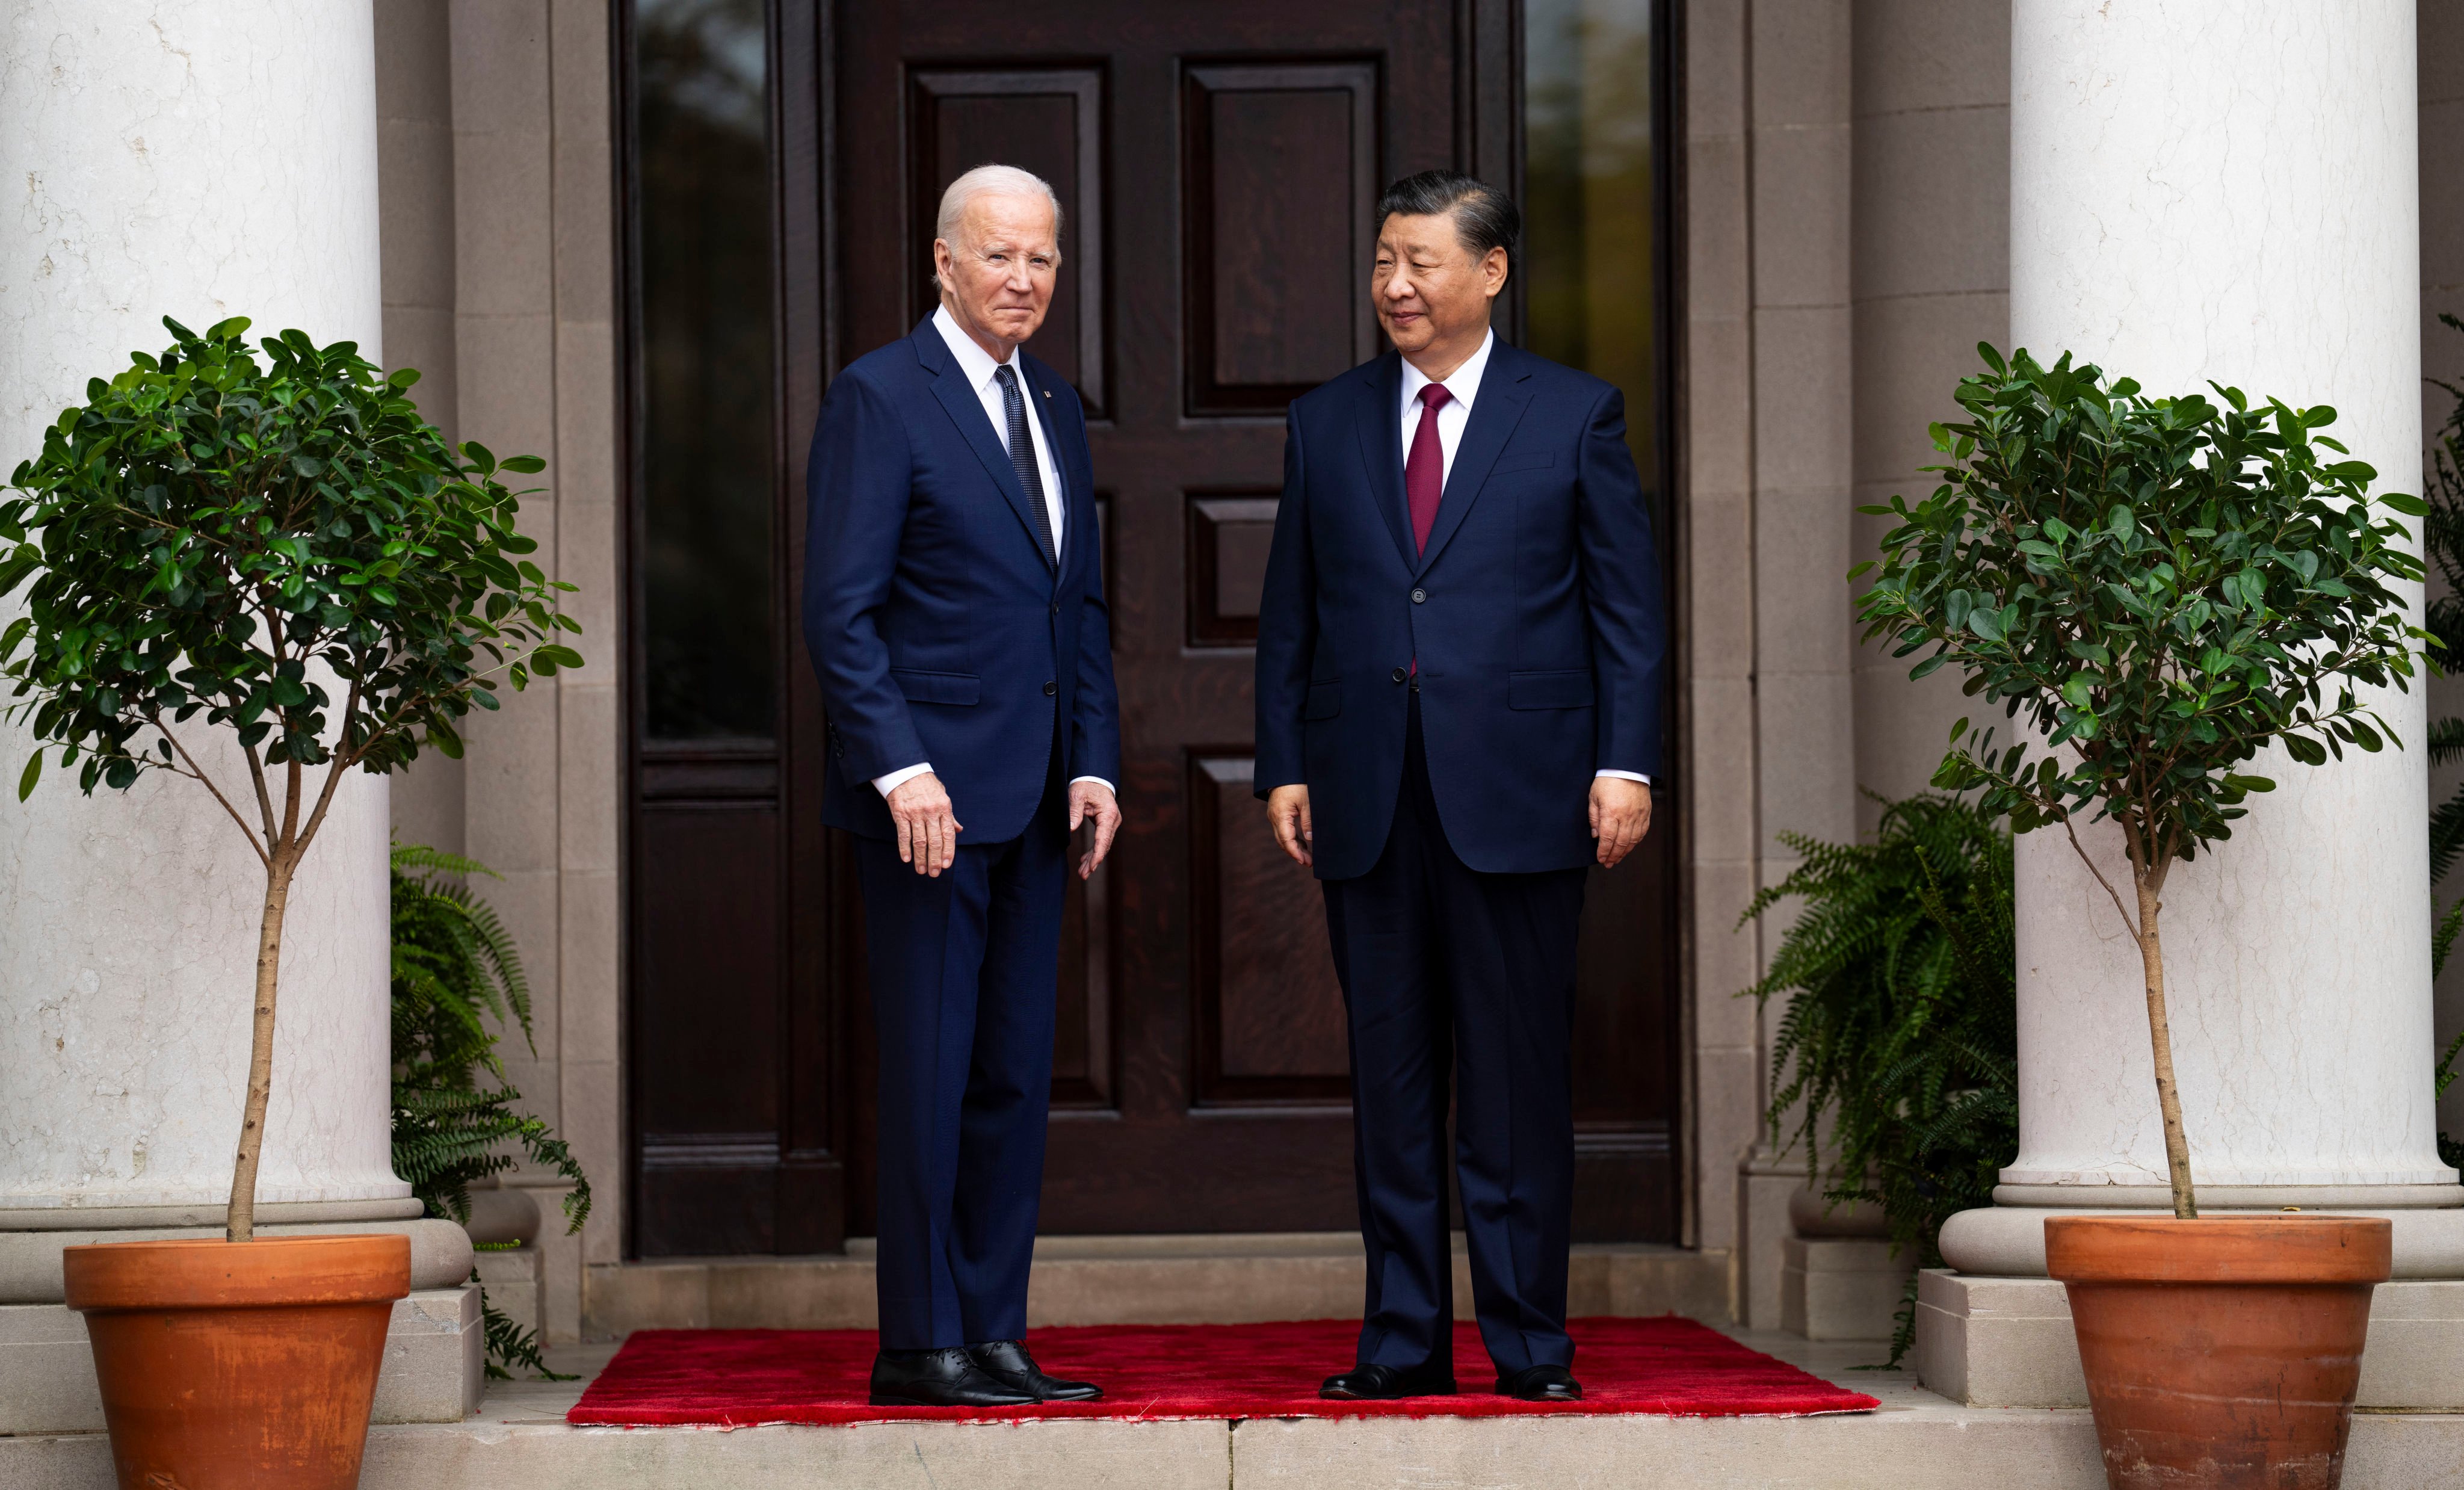 US President Joe Biden and his Chinese counterpart Xi Jinping at the Filoli Estate in Woodside, California, ahead of their meeting on Wednesday. Photo: AP